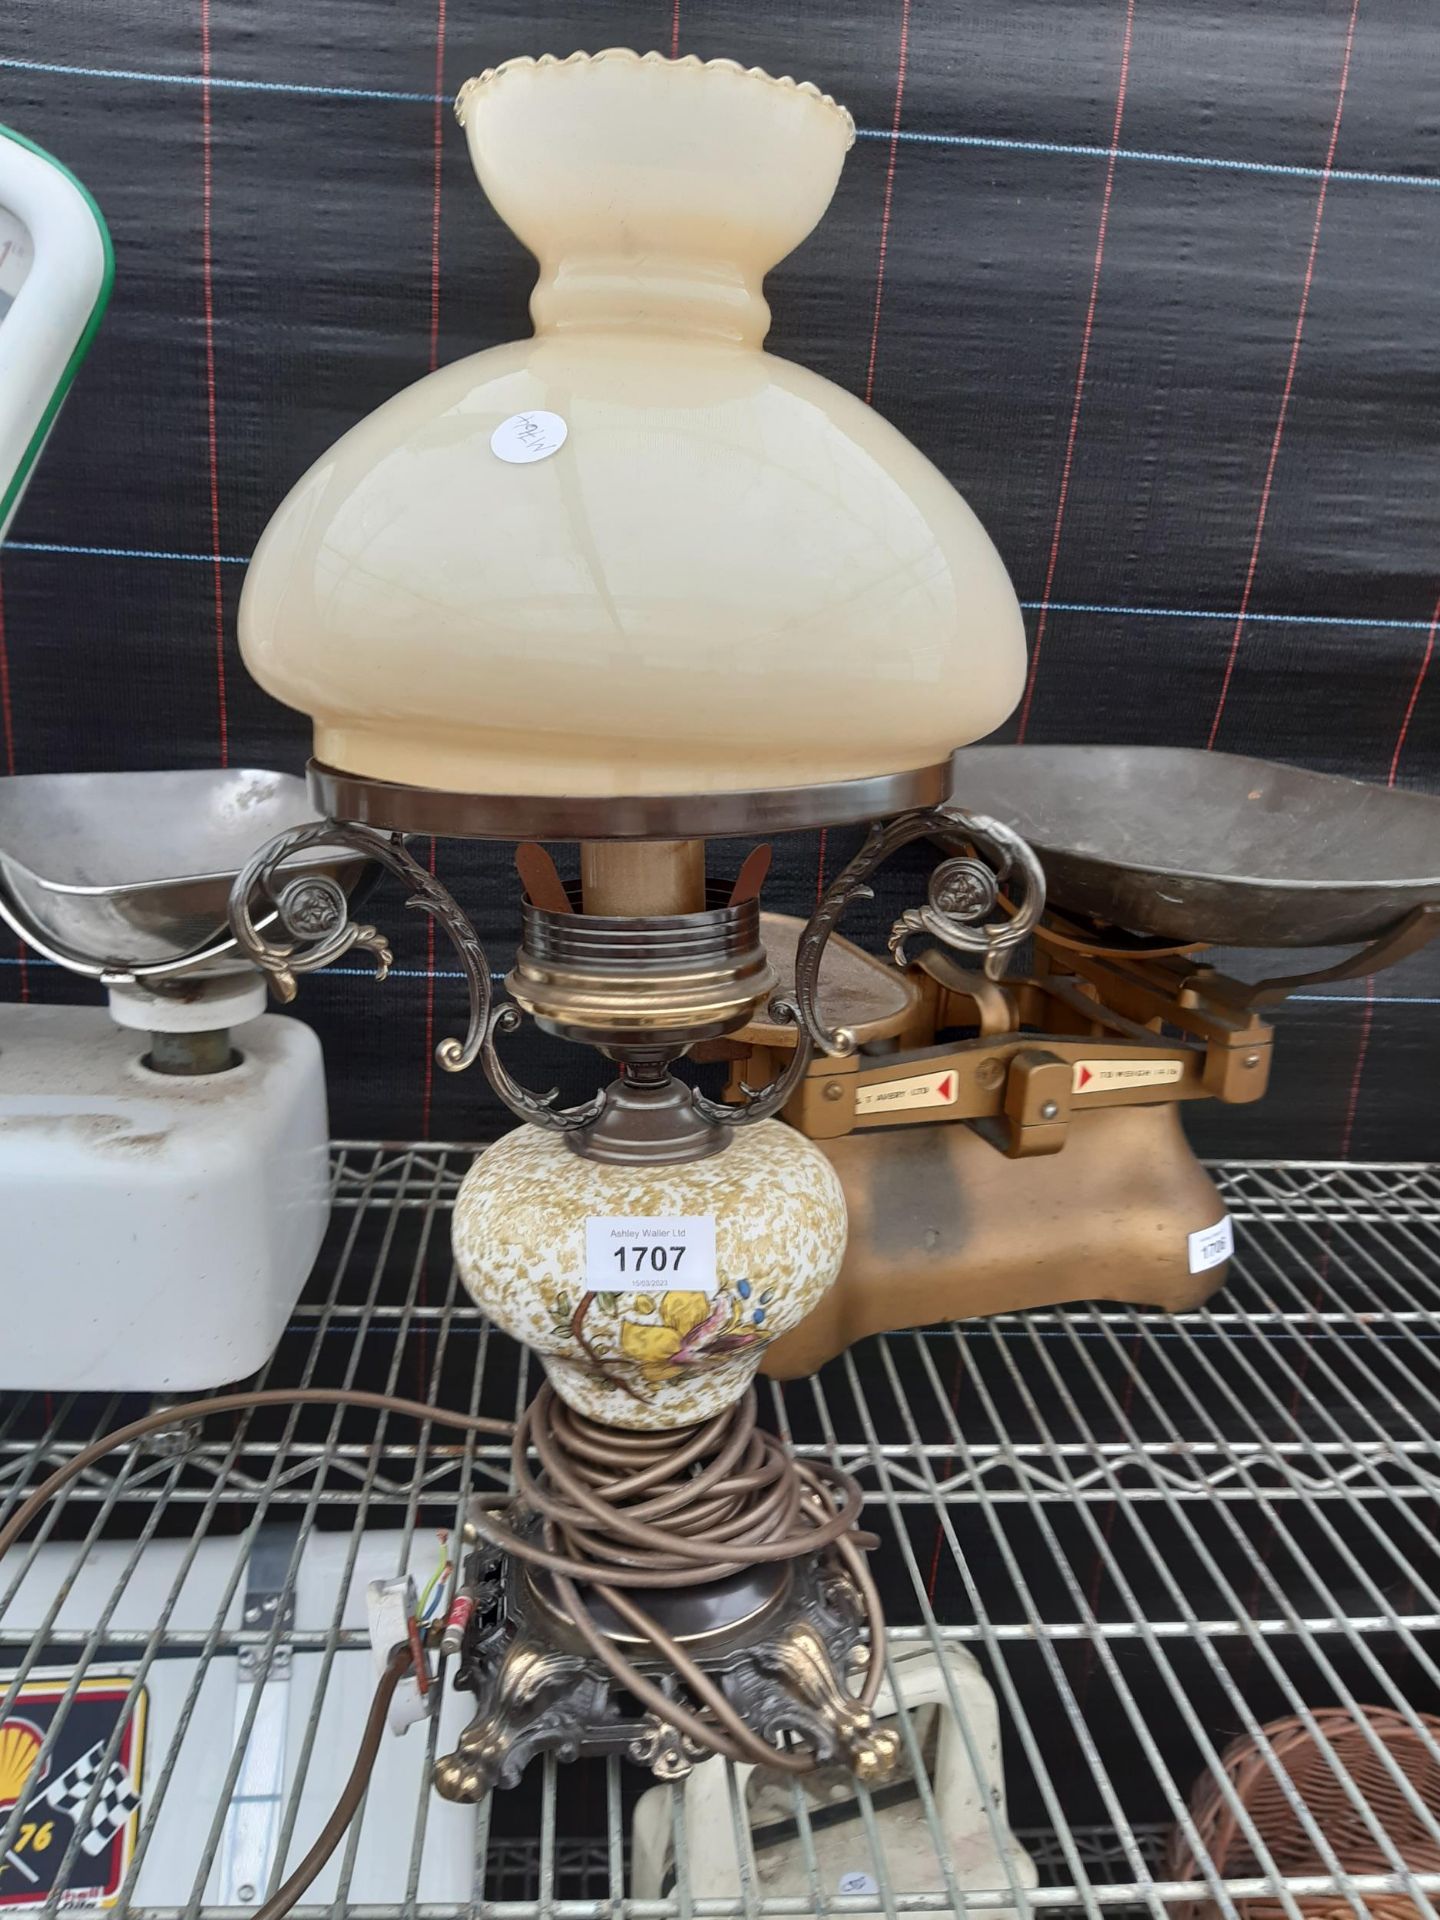 A VINTAGE BRASS OIL LAMP CONVERTED TO ELECTRIC COMPLETE WITH GLASS SHADE - Image 2 of 2